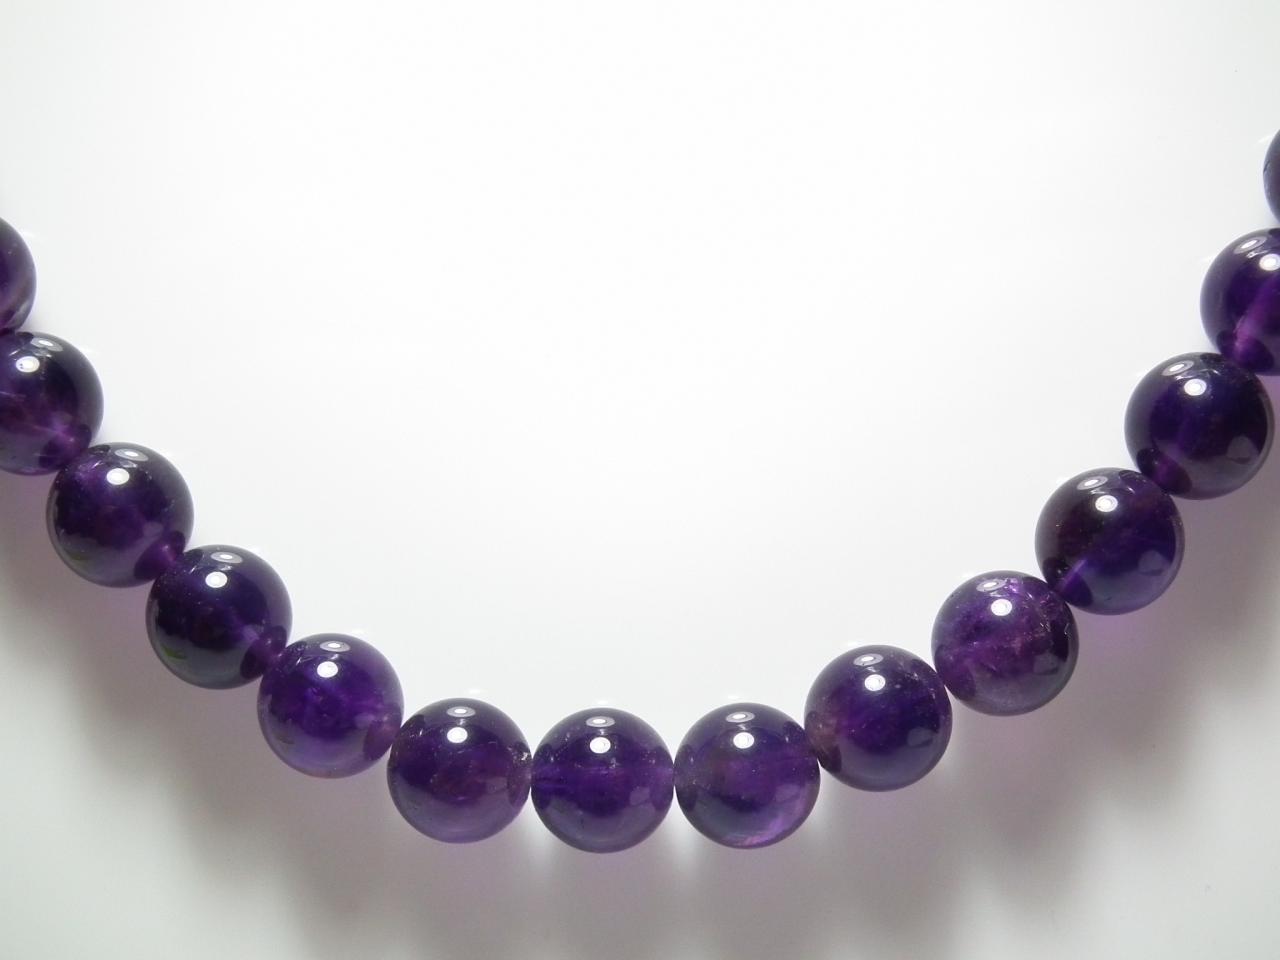 Loose Gemstone Natural Aaa Amethyst Beads Ball-10mm Strand 16-inches Weight-300-cts